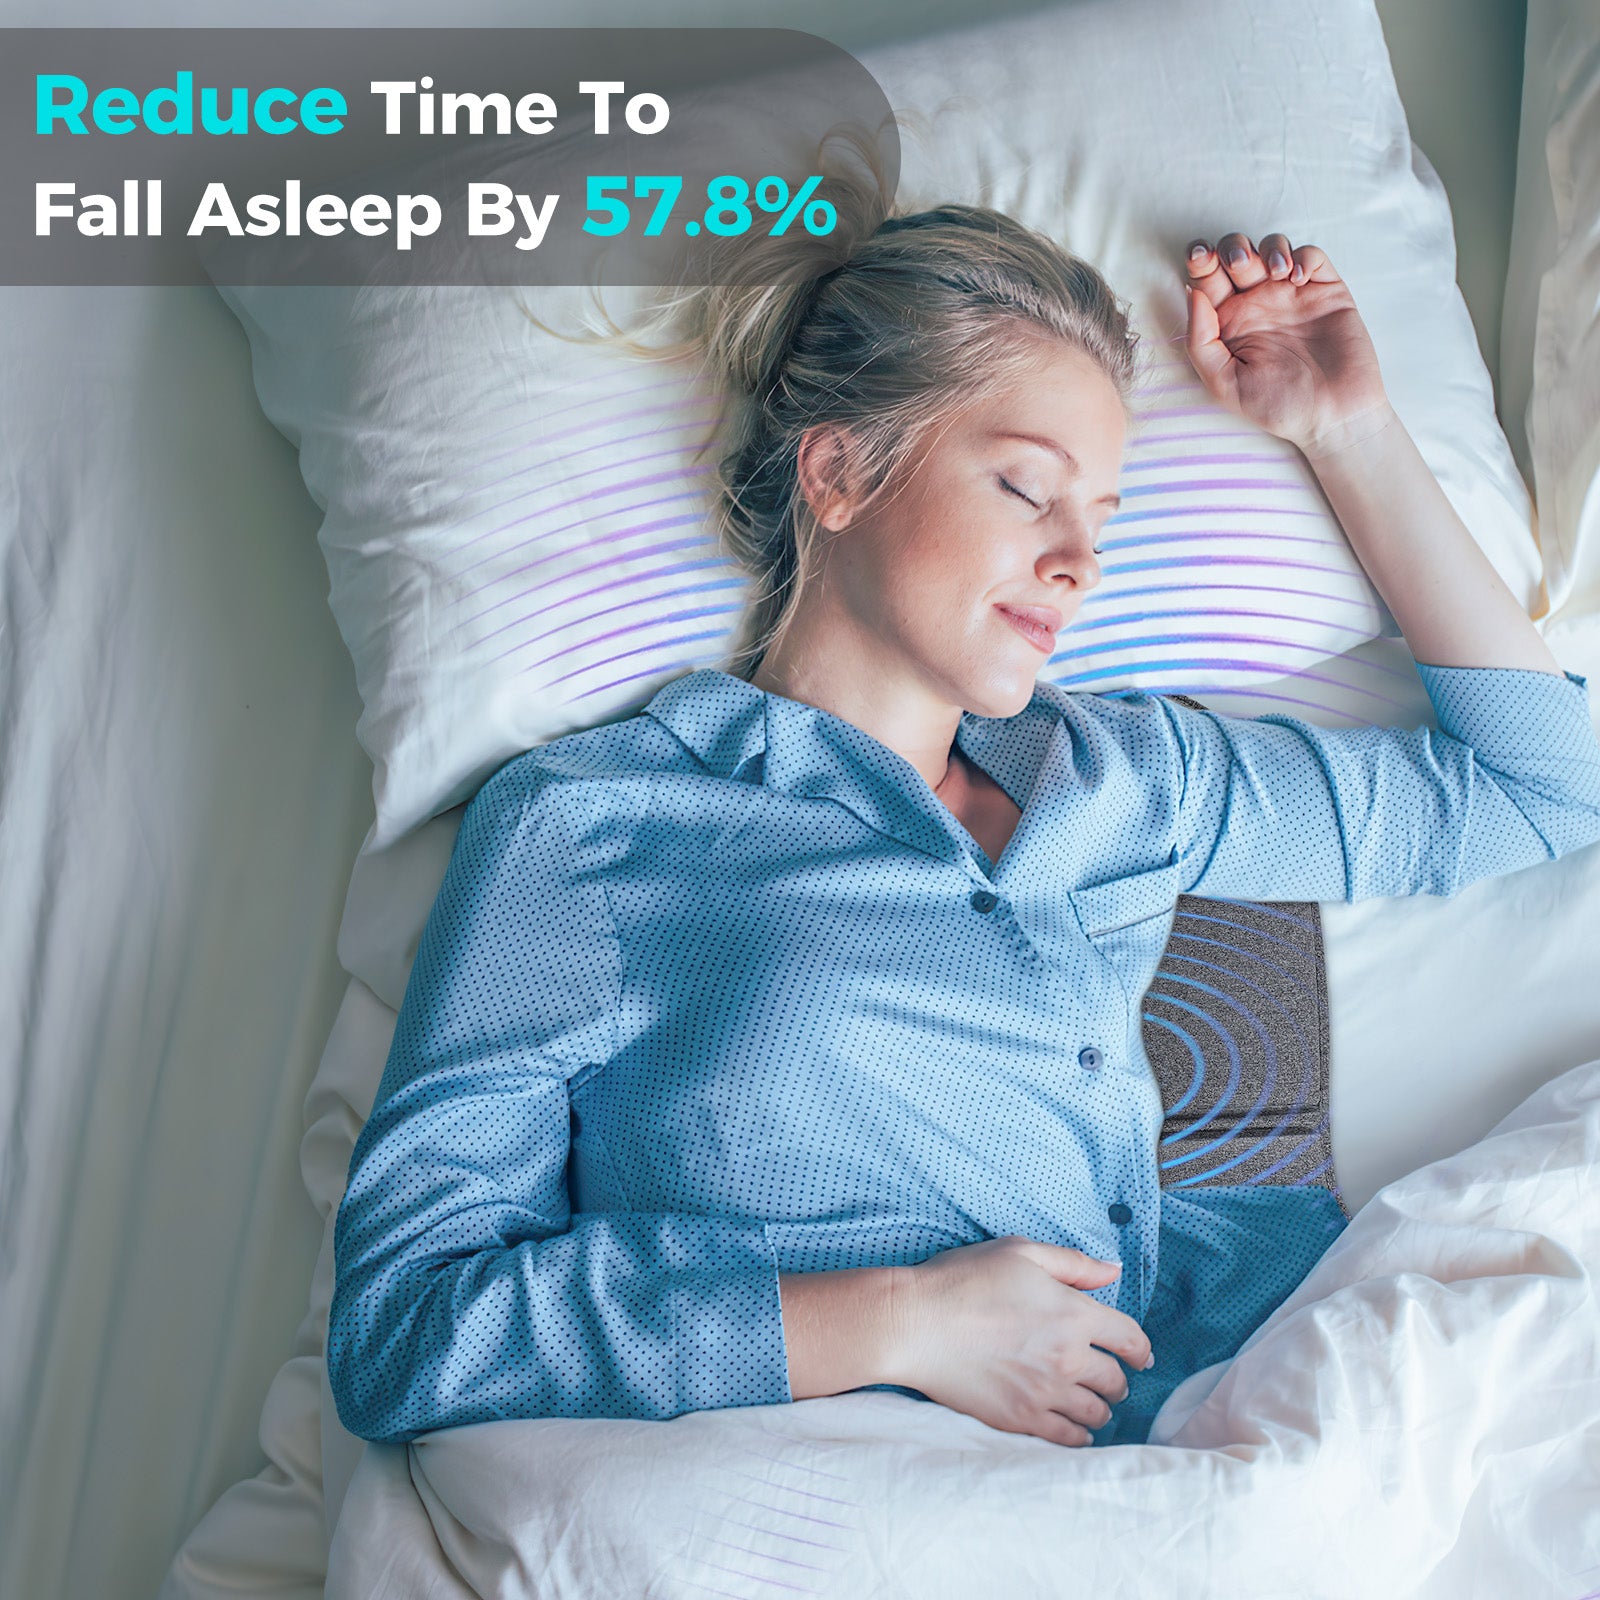 MindLax reduce time to fall asleep by 57.8%